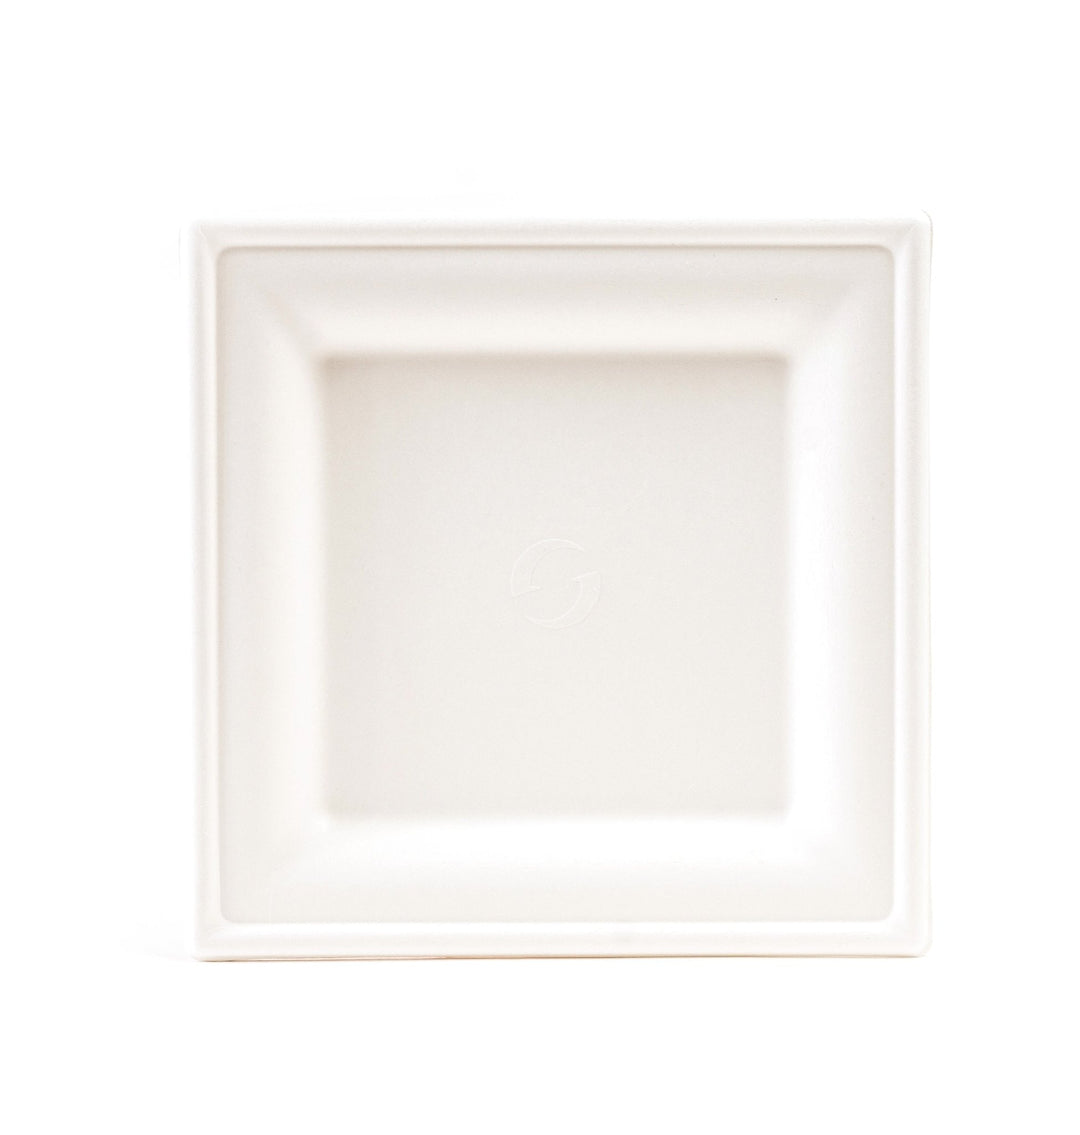 Greenwave GS-P008 White Square Compostable Plate 8x8